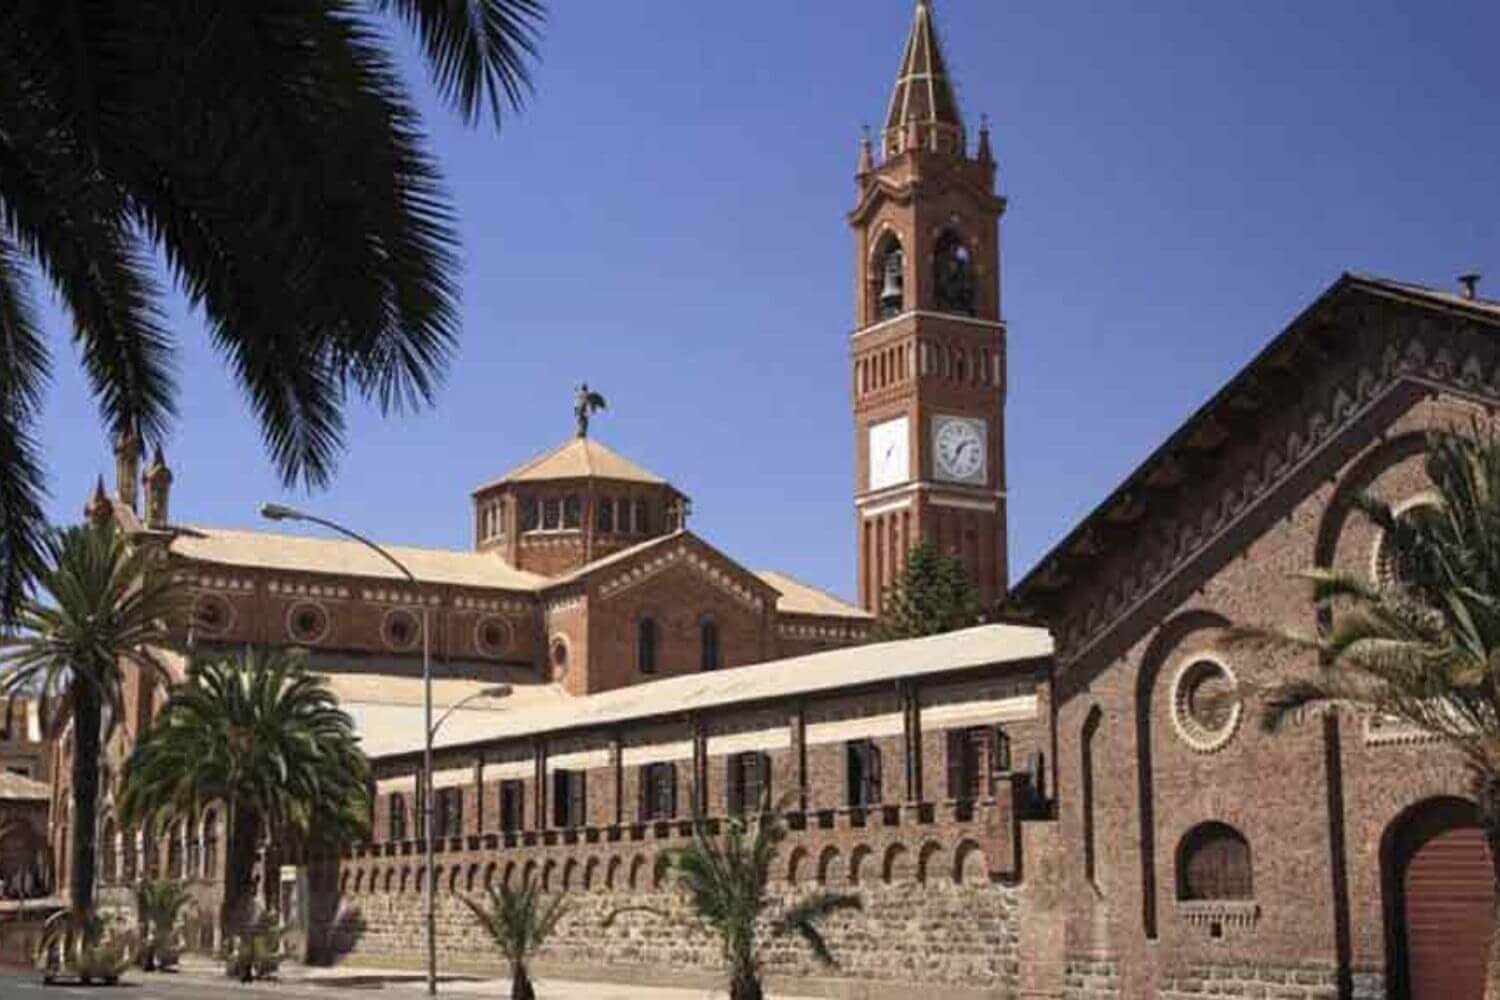 11Church of Our Lady of the Rosary, Asmara